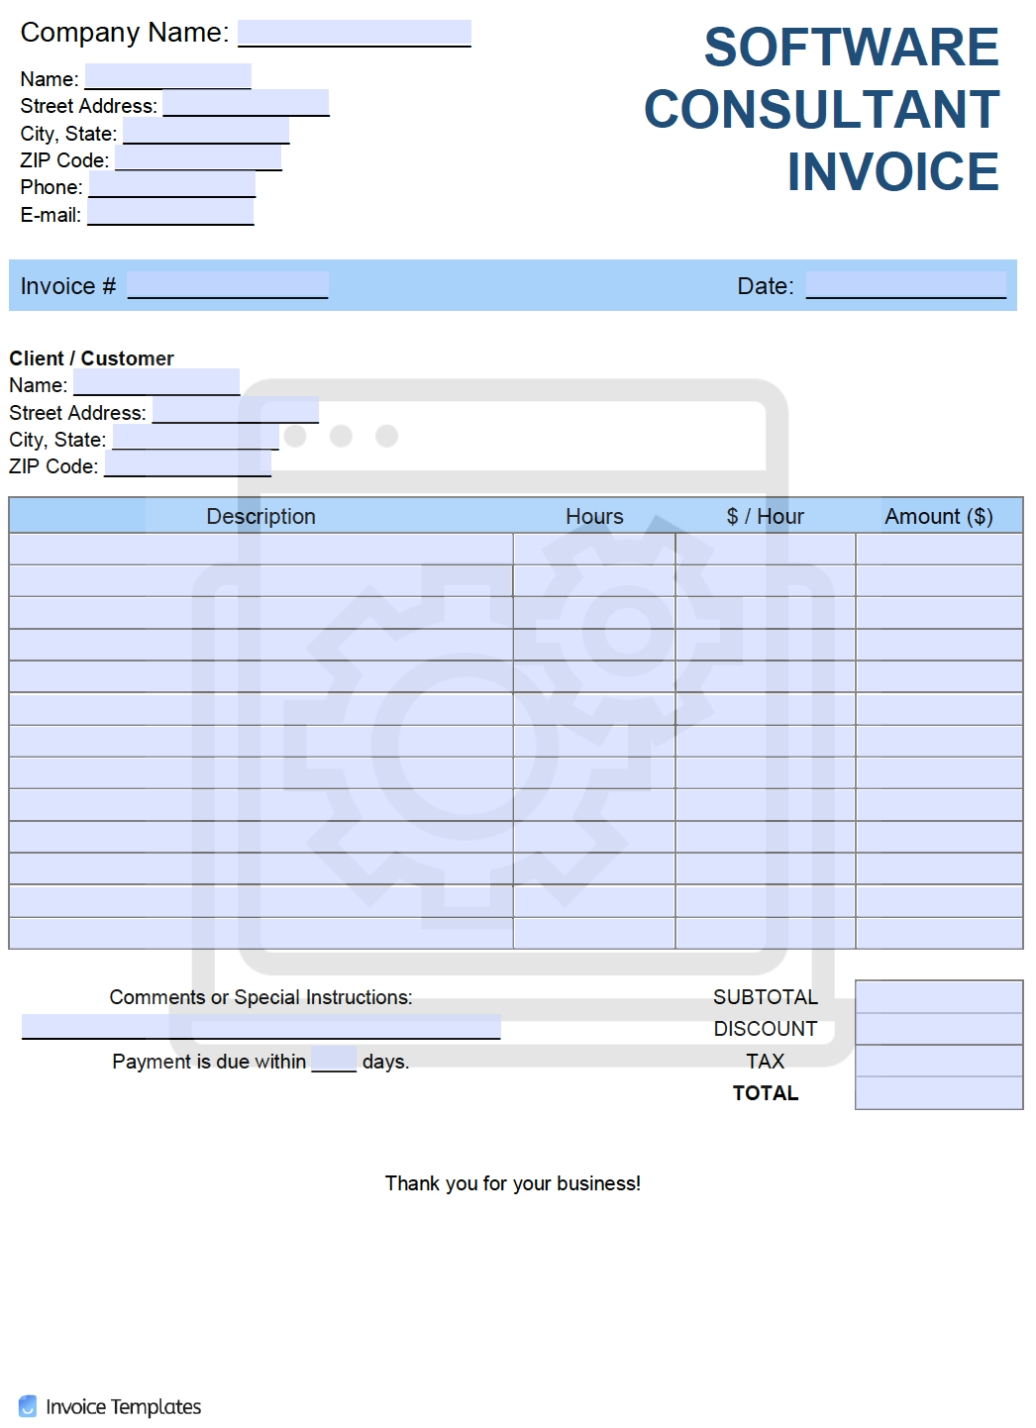 Free Software Consultant Invoice Template | Pdf | Word | Excel Intended For Consult Note Template